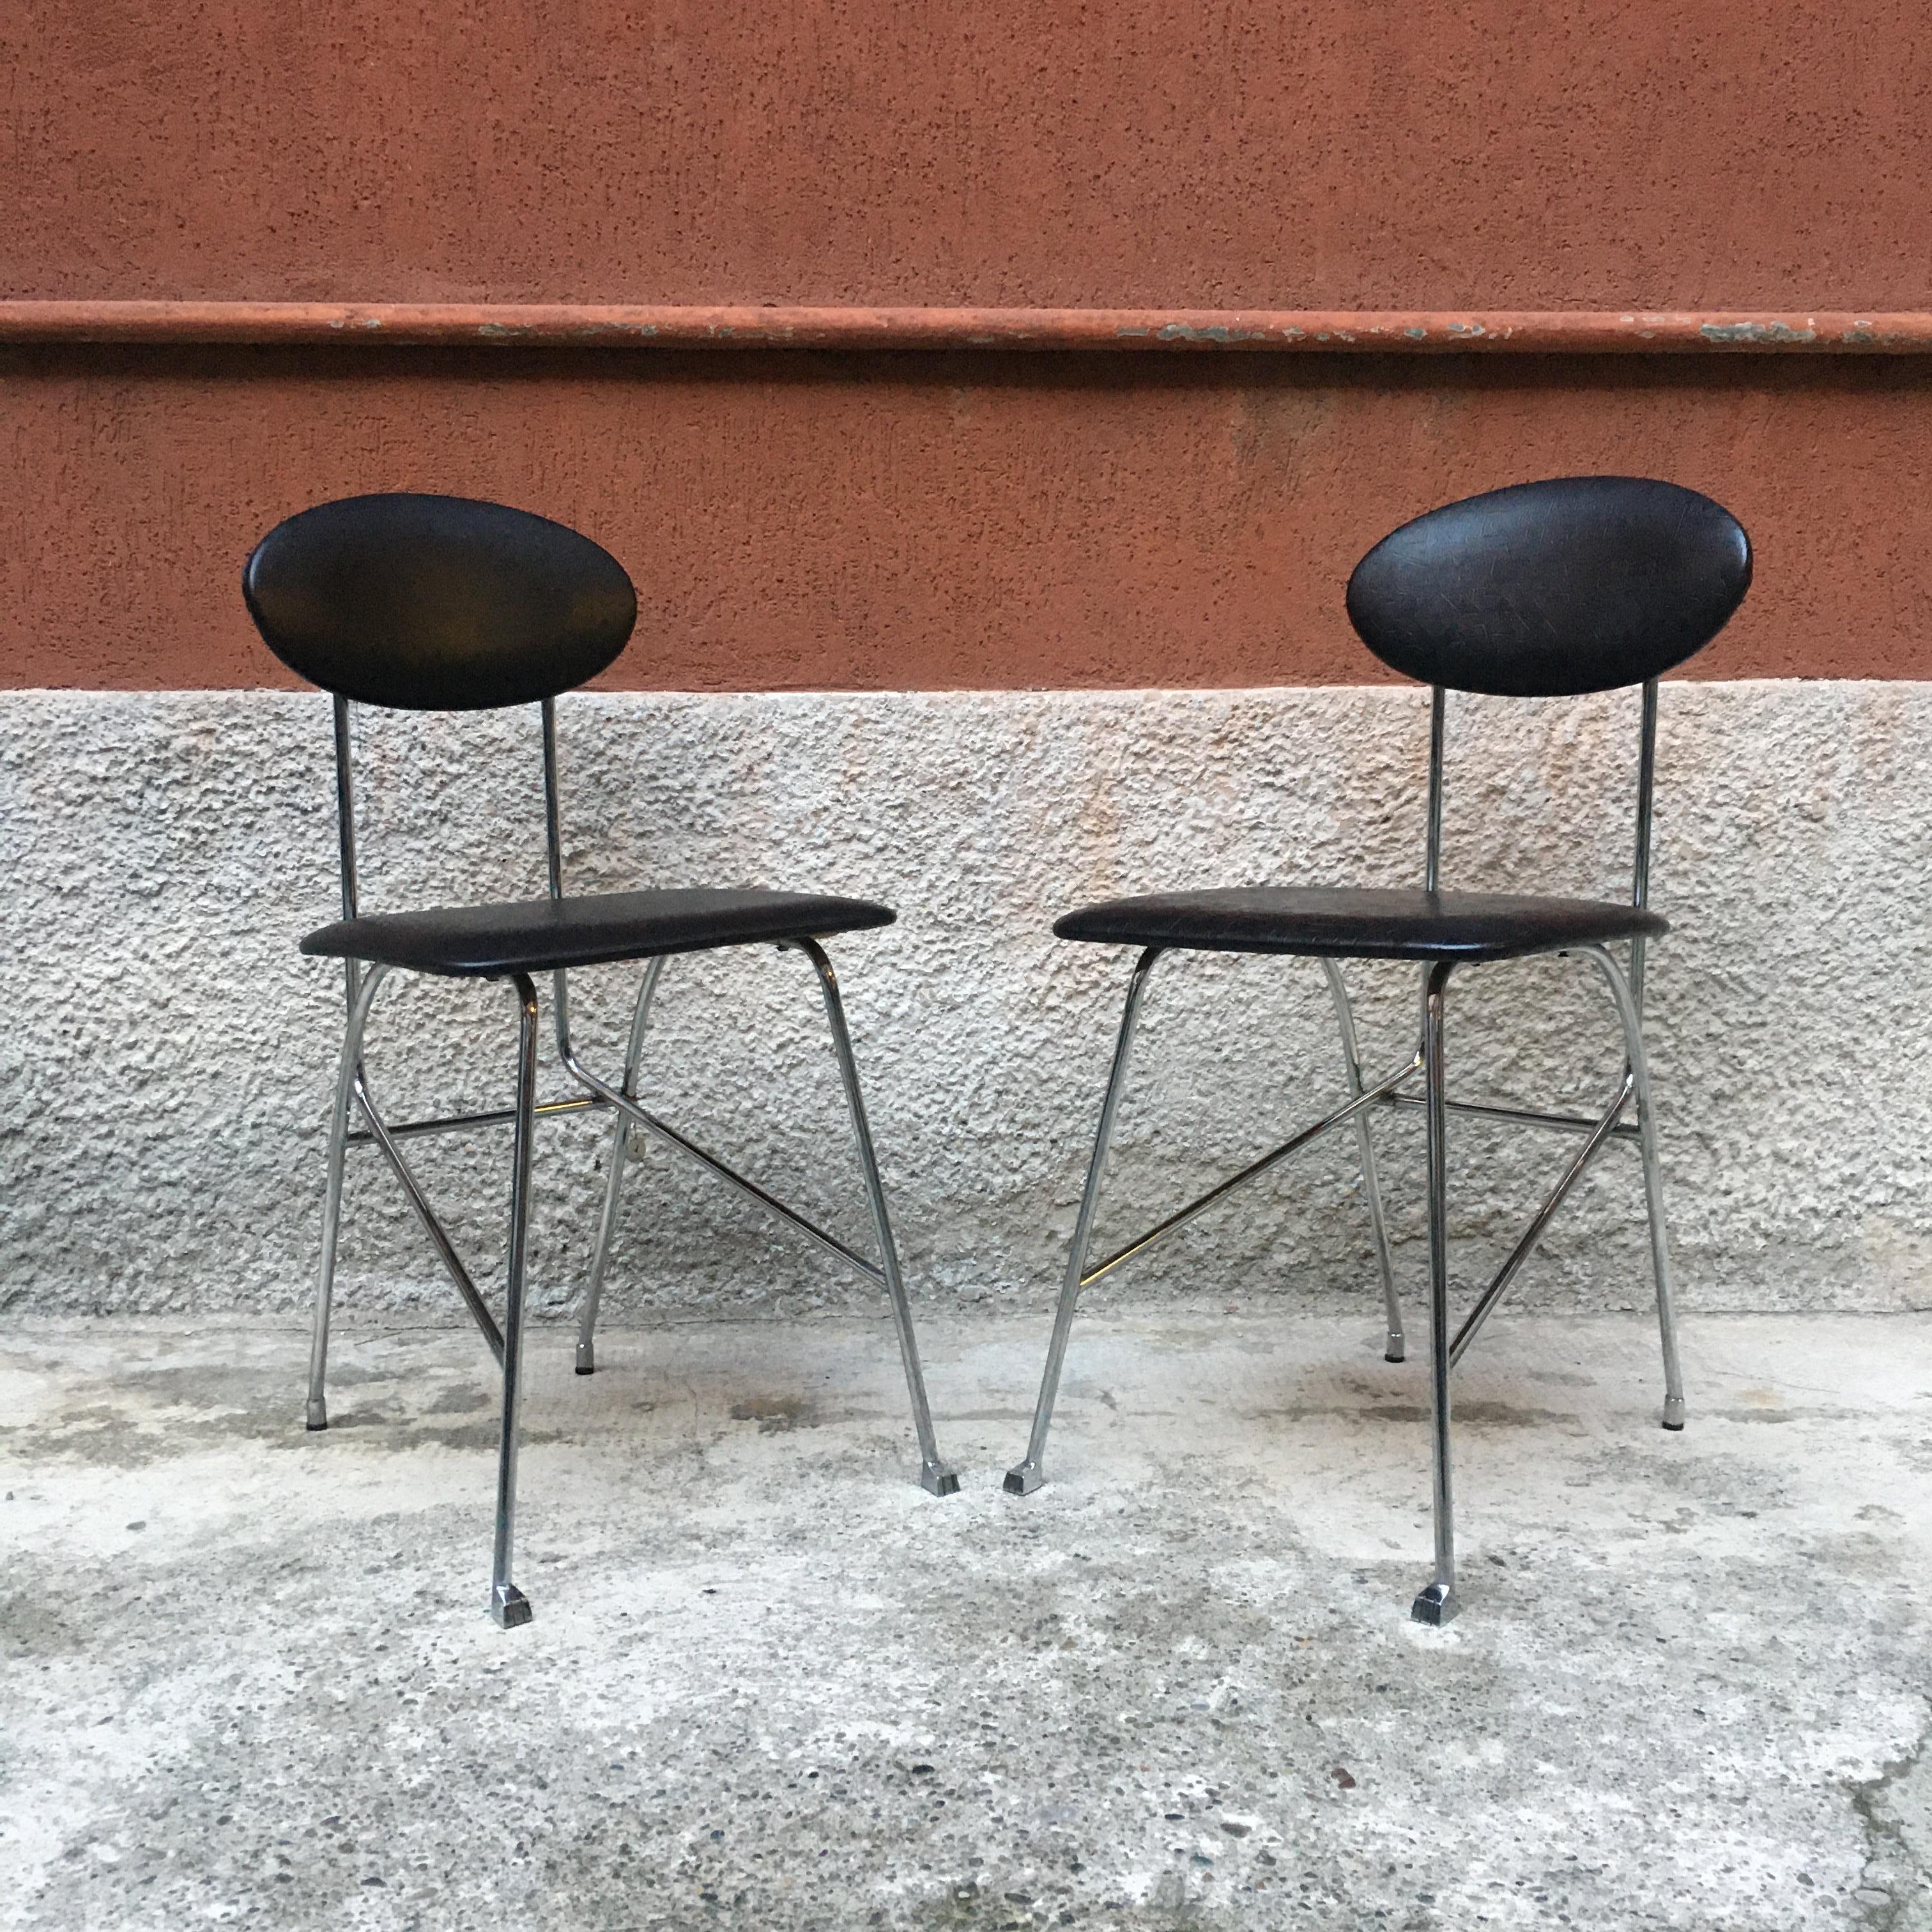 Post-Modern Italian Chromed Metal Chair with Leather Cover by Mendini for Zabro, 1980s